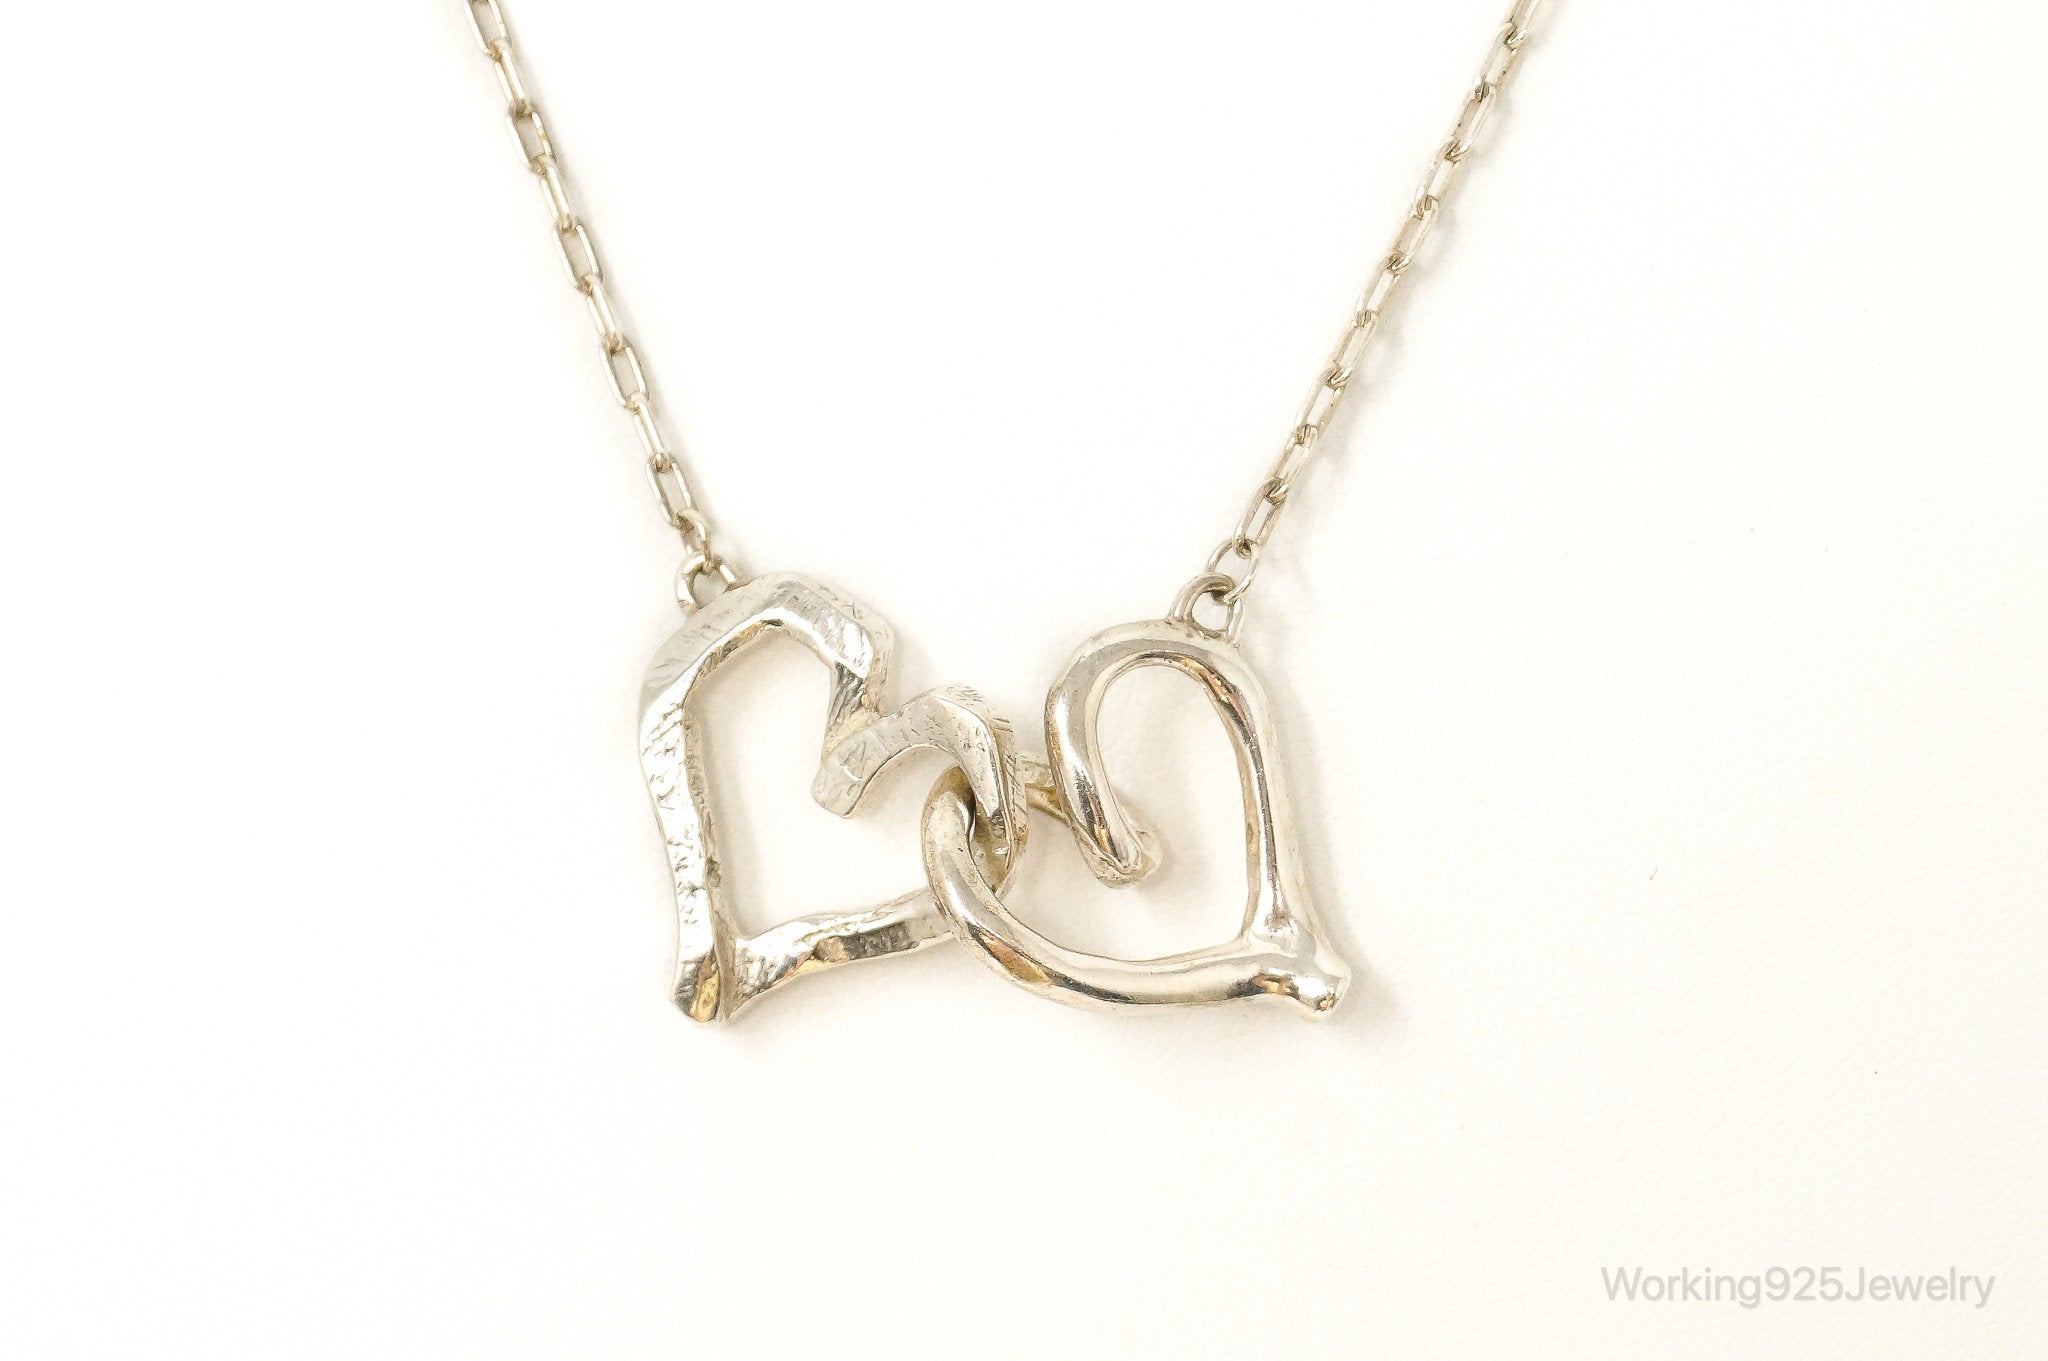 Vintage Open Linked Hearts Lovers Sterling Silver Necklace